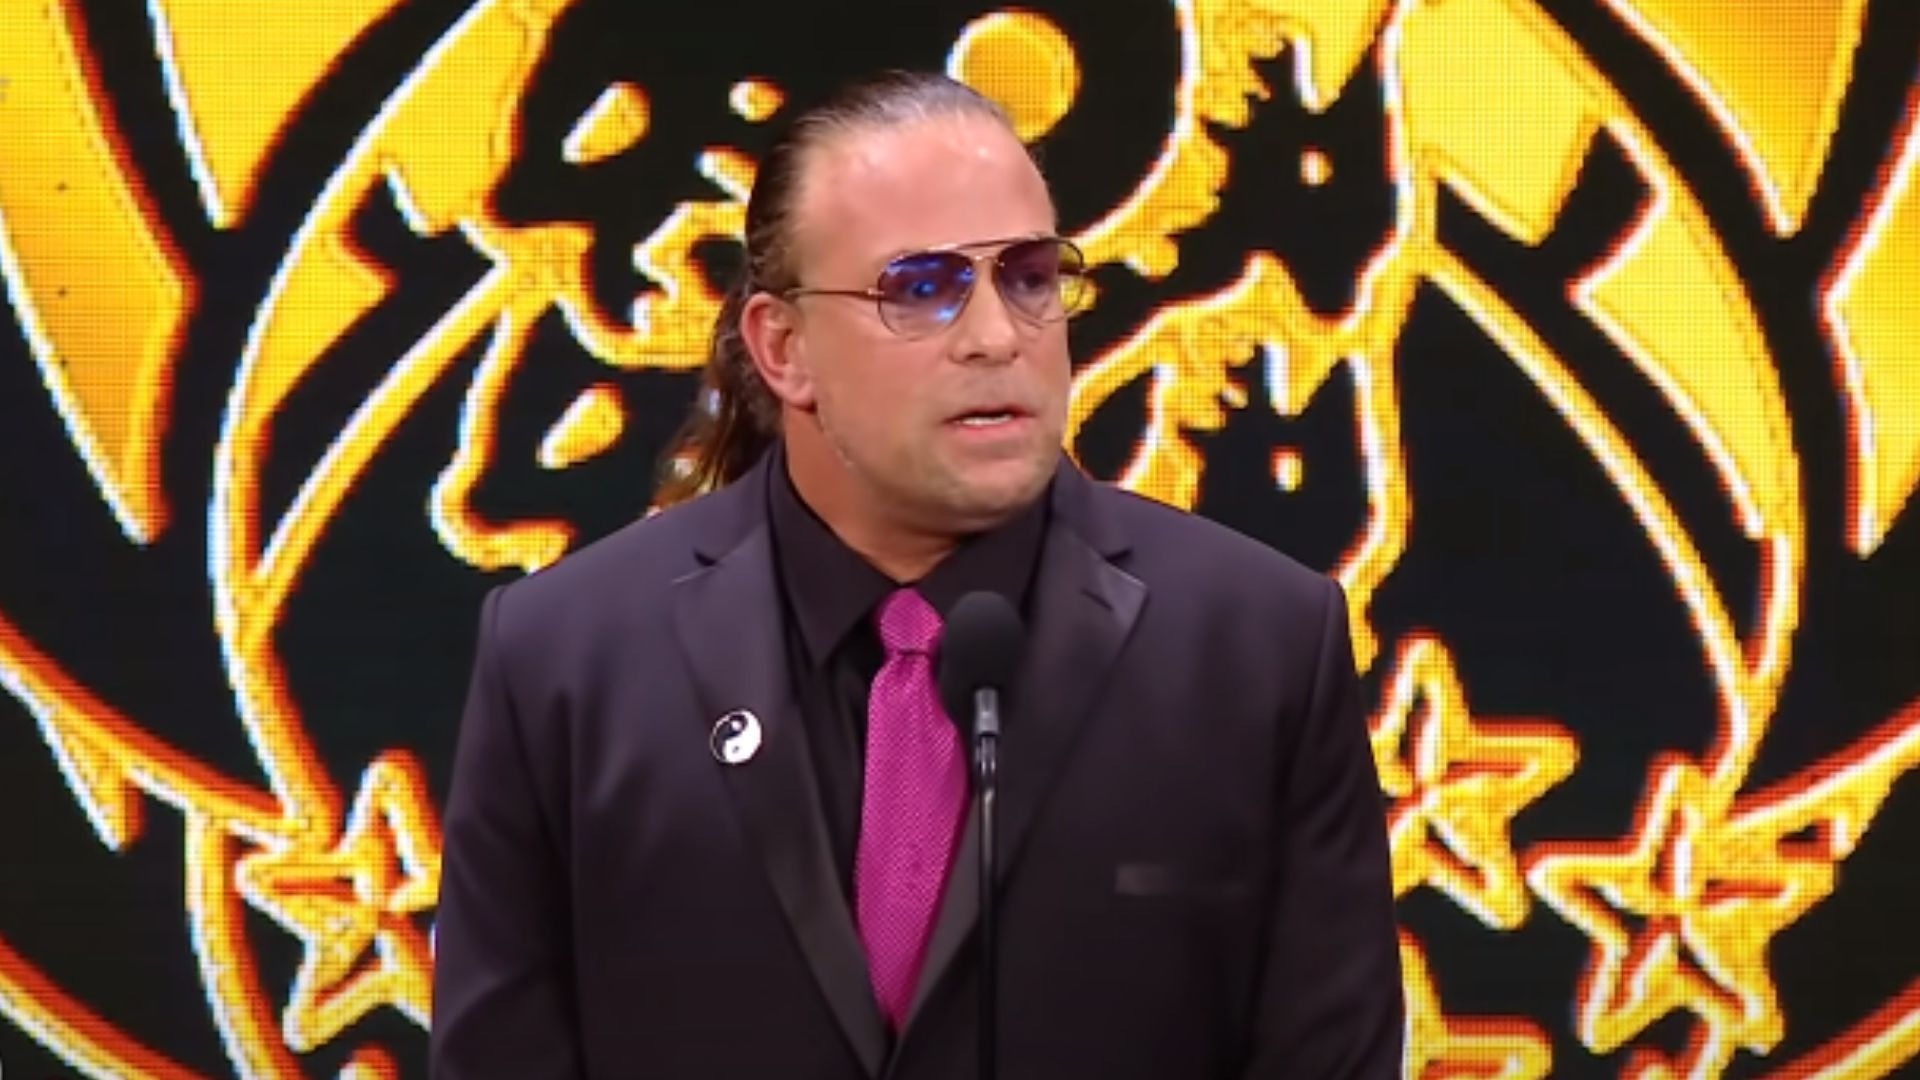 Rob Van Dam joined the WWE Hall of Fame in 2021